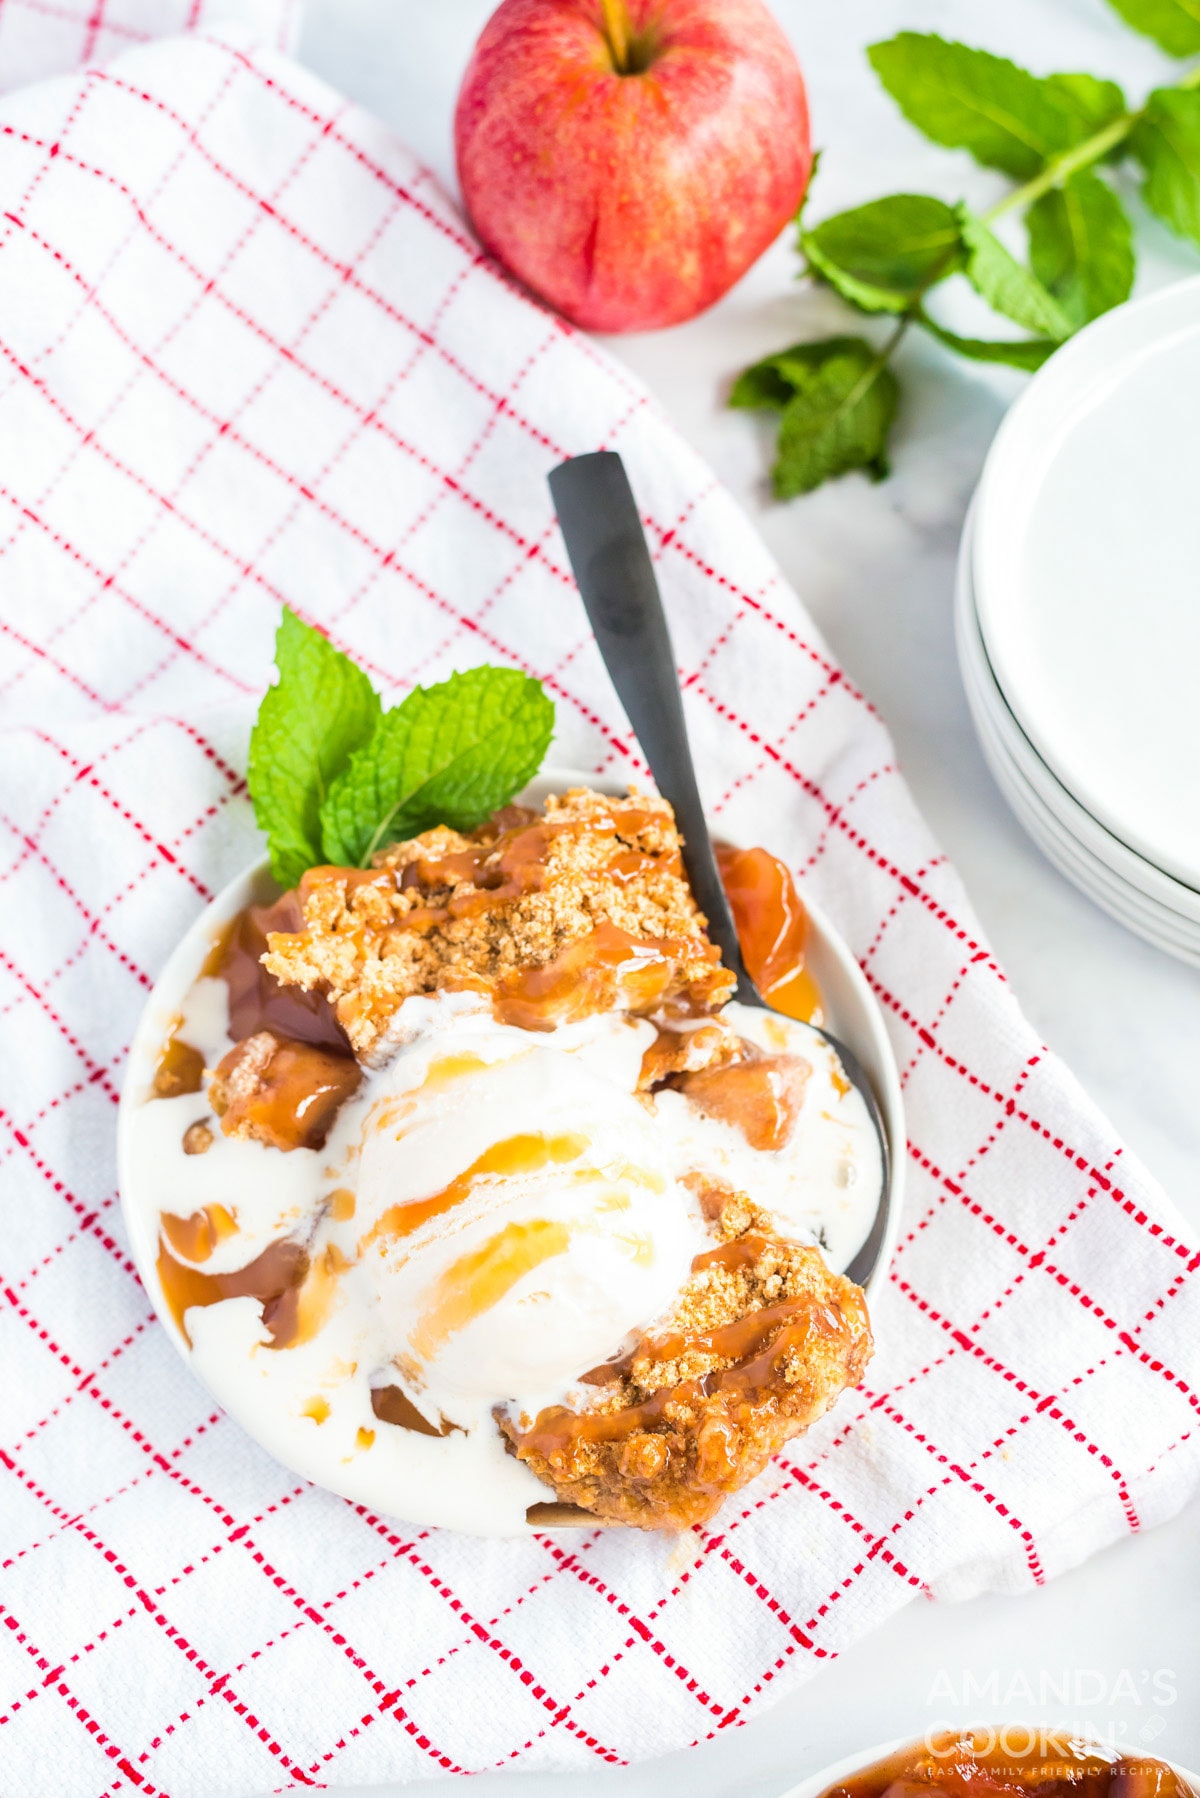 crockpot apple cobbler with ice cream on a checkered towel